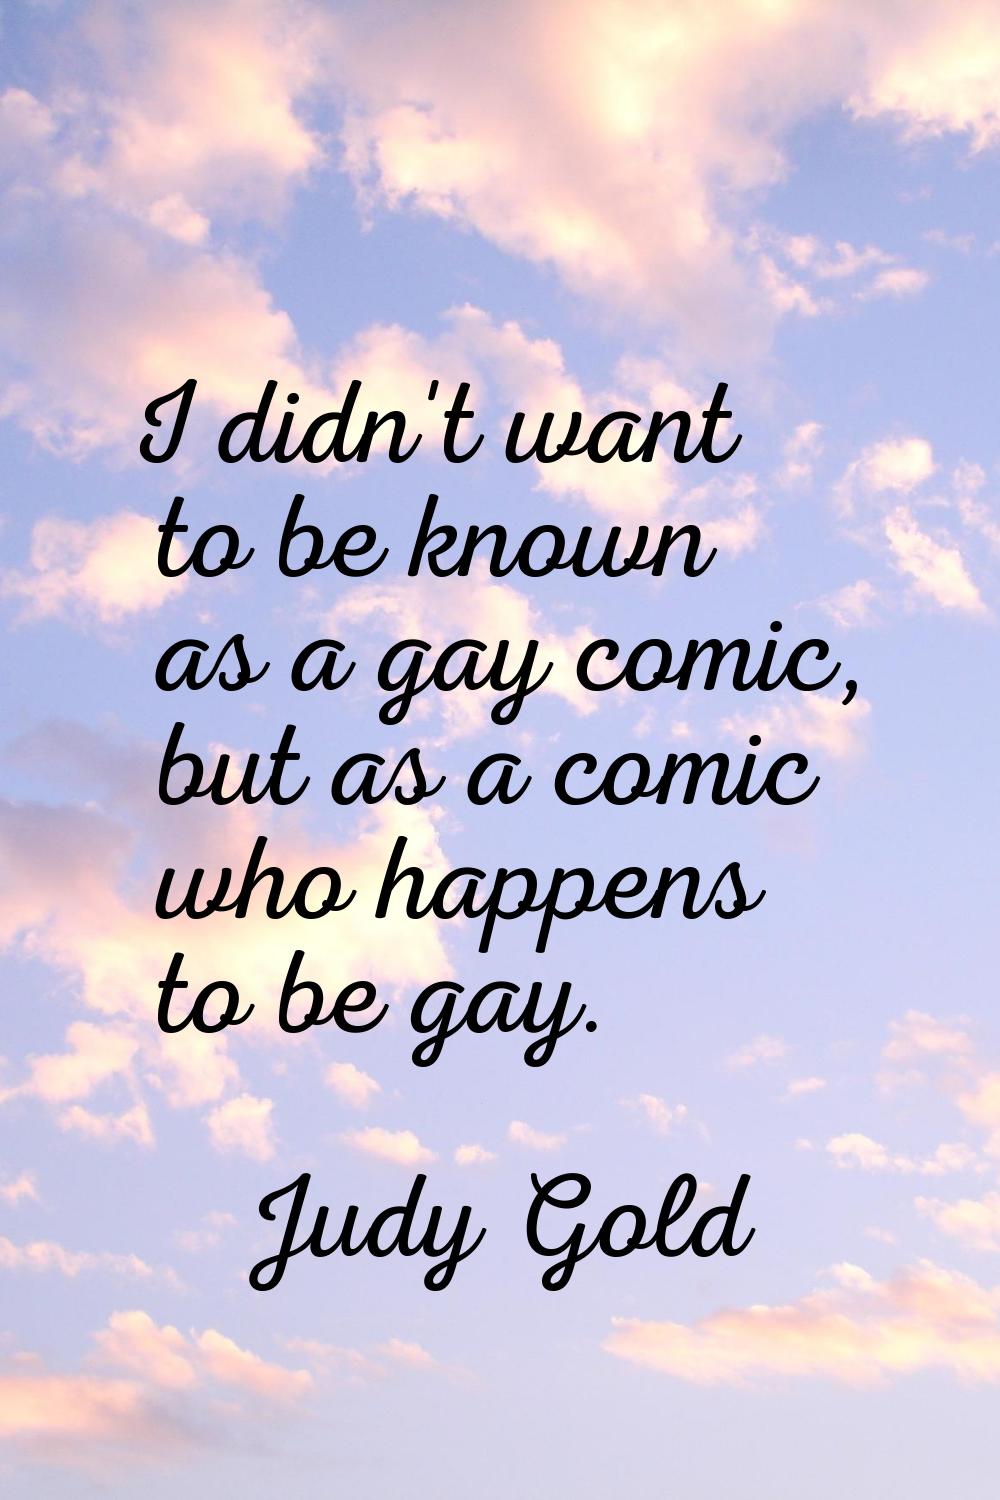 I didn't want to be known as a gay comic, but as a comic who happens to be gay.